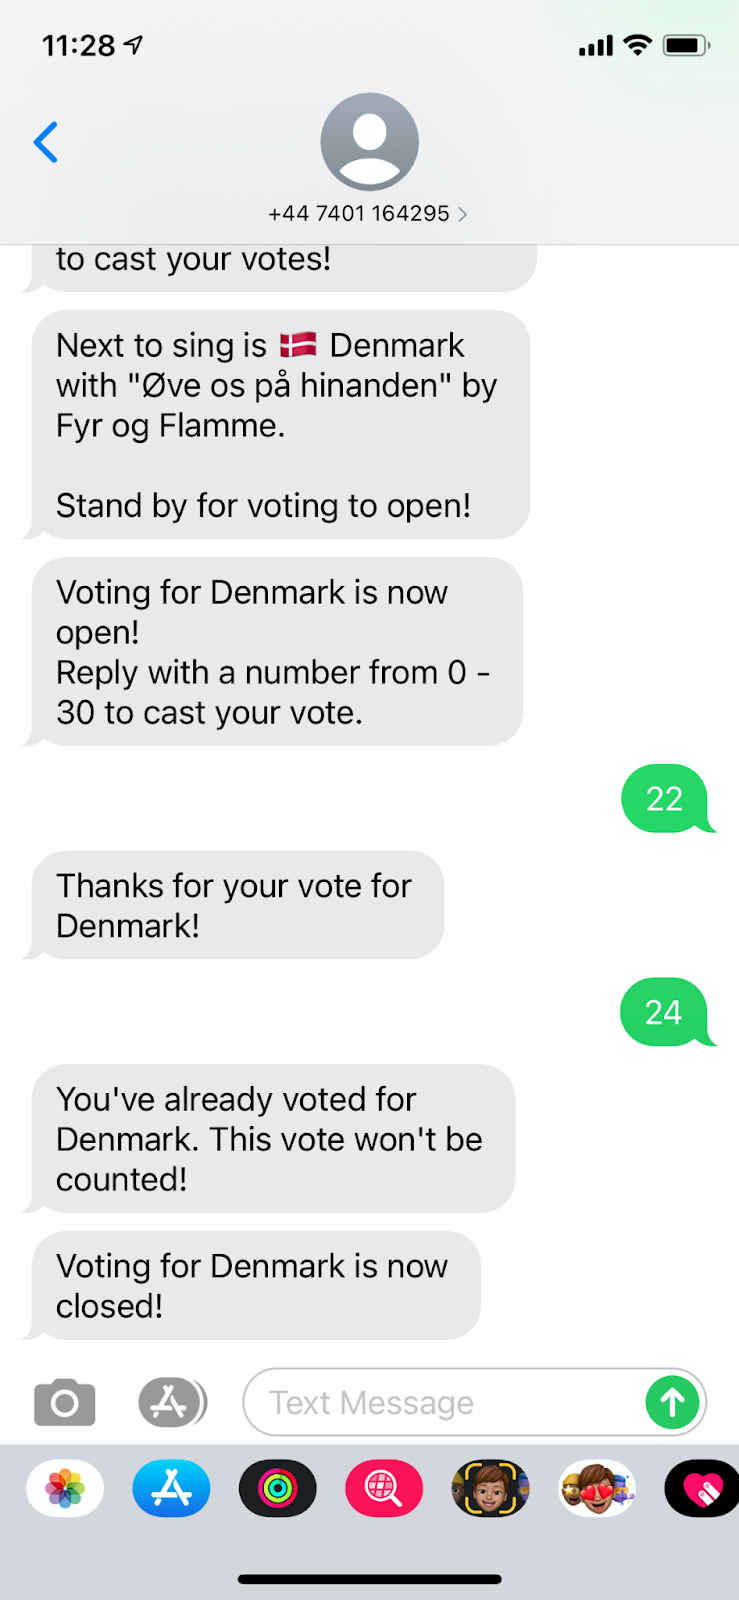 SMS telling you the voting is now closed